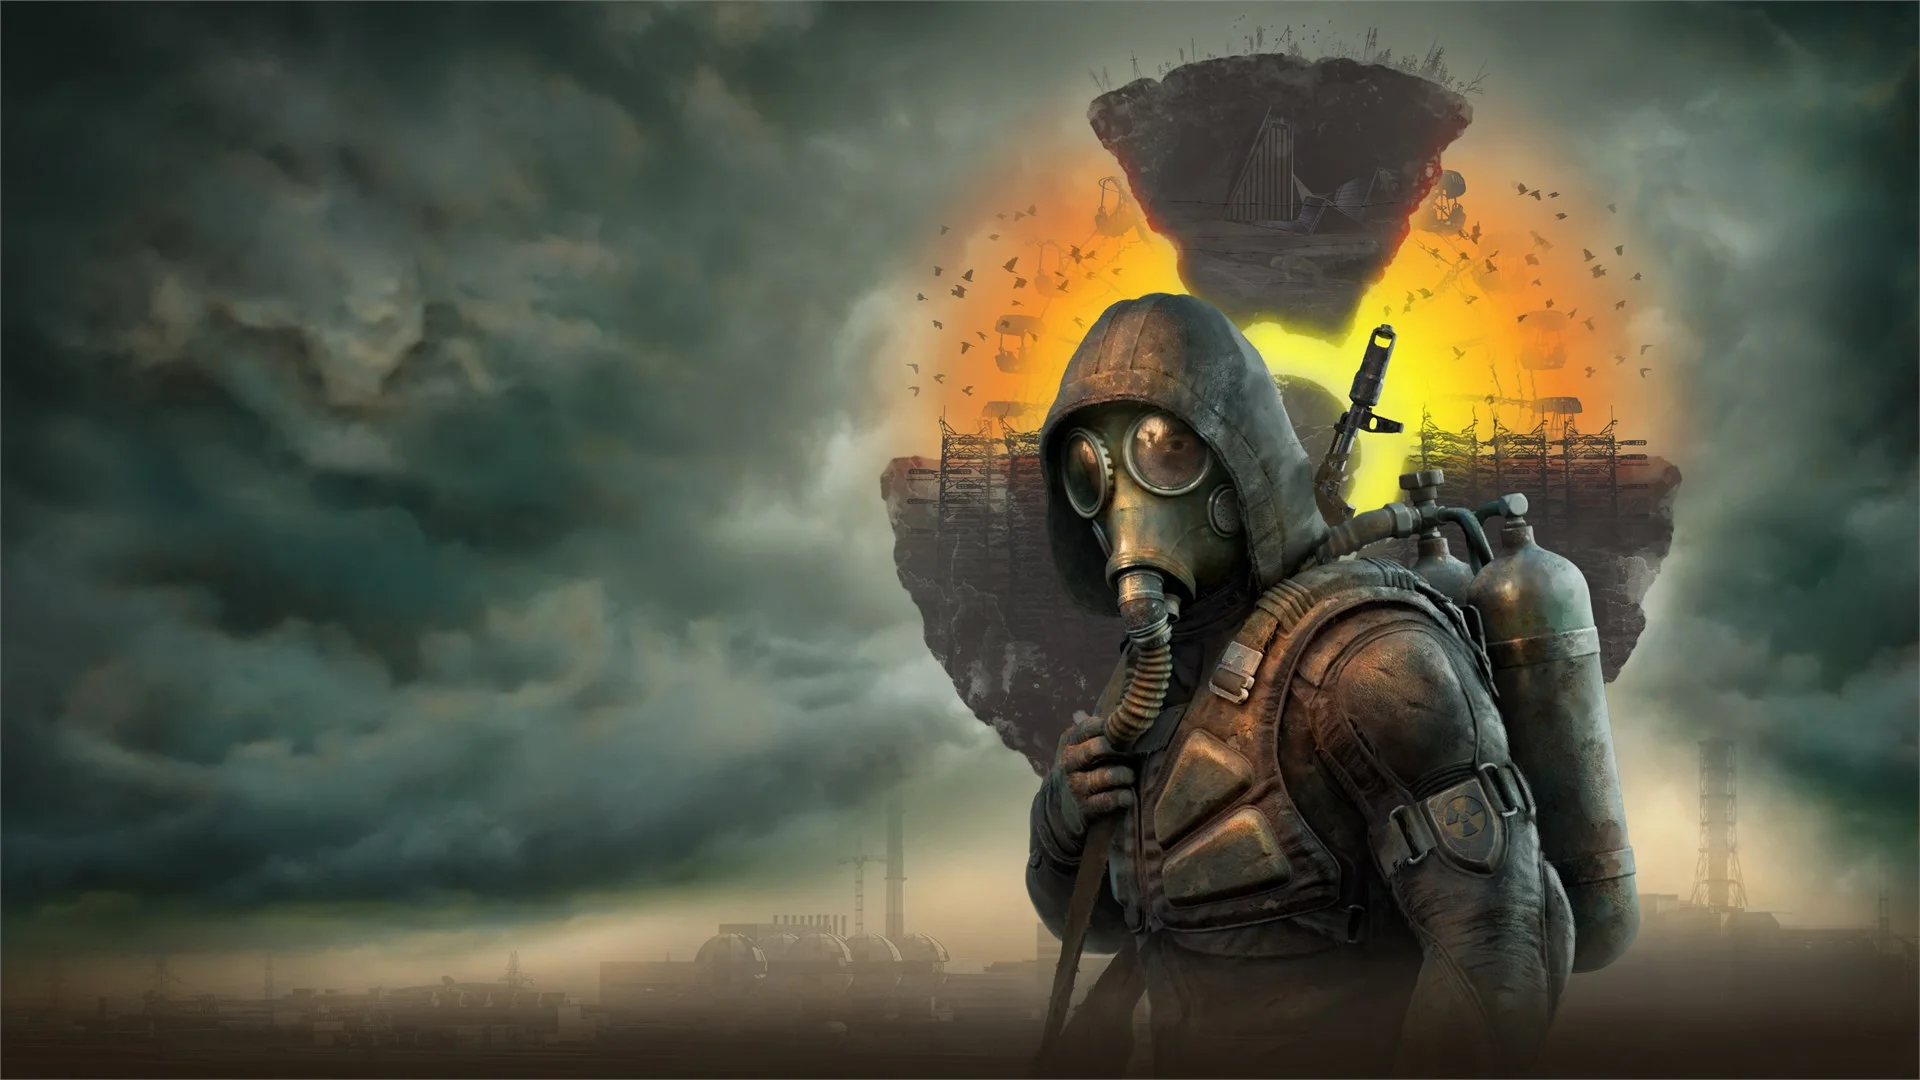 The story trailer for S.T.A.L.K.E.R.: Heart of Chernobyl was suddenly released